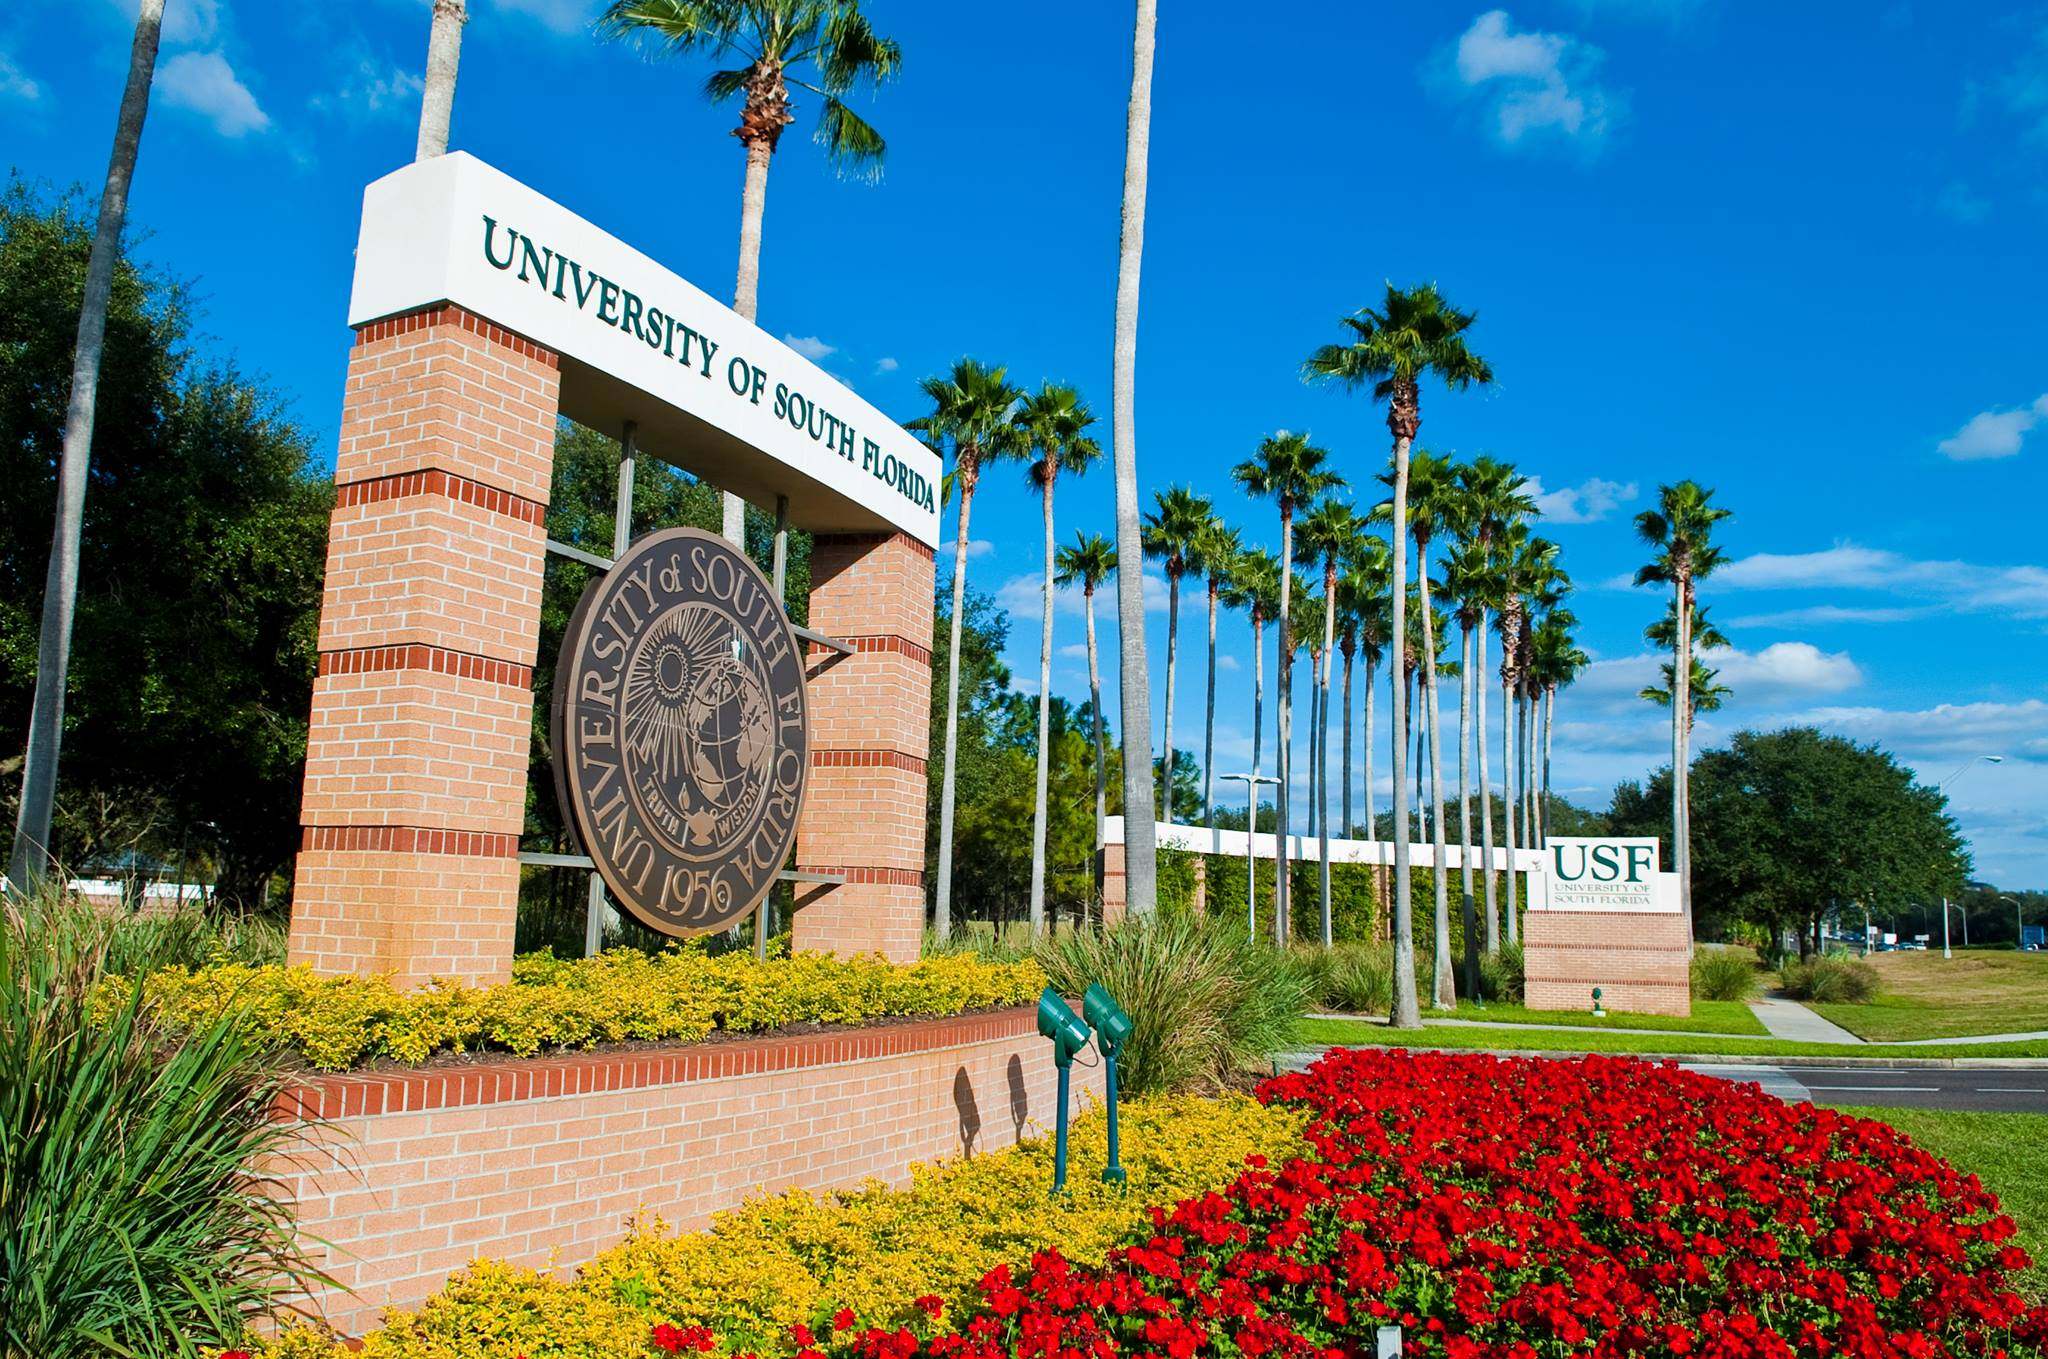 The plaintiffs said the law “casts a cloud of suspicion” over Chinese people seeking to work at Florida’s public universities and colleges. Photo: University of South Florida